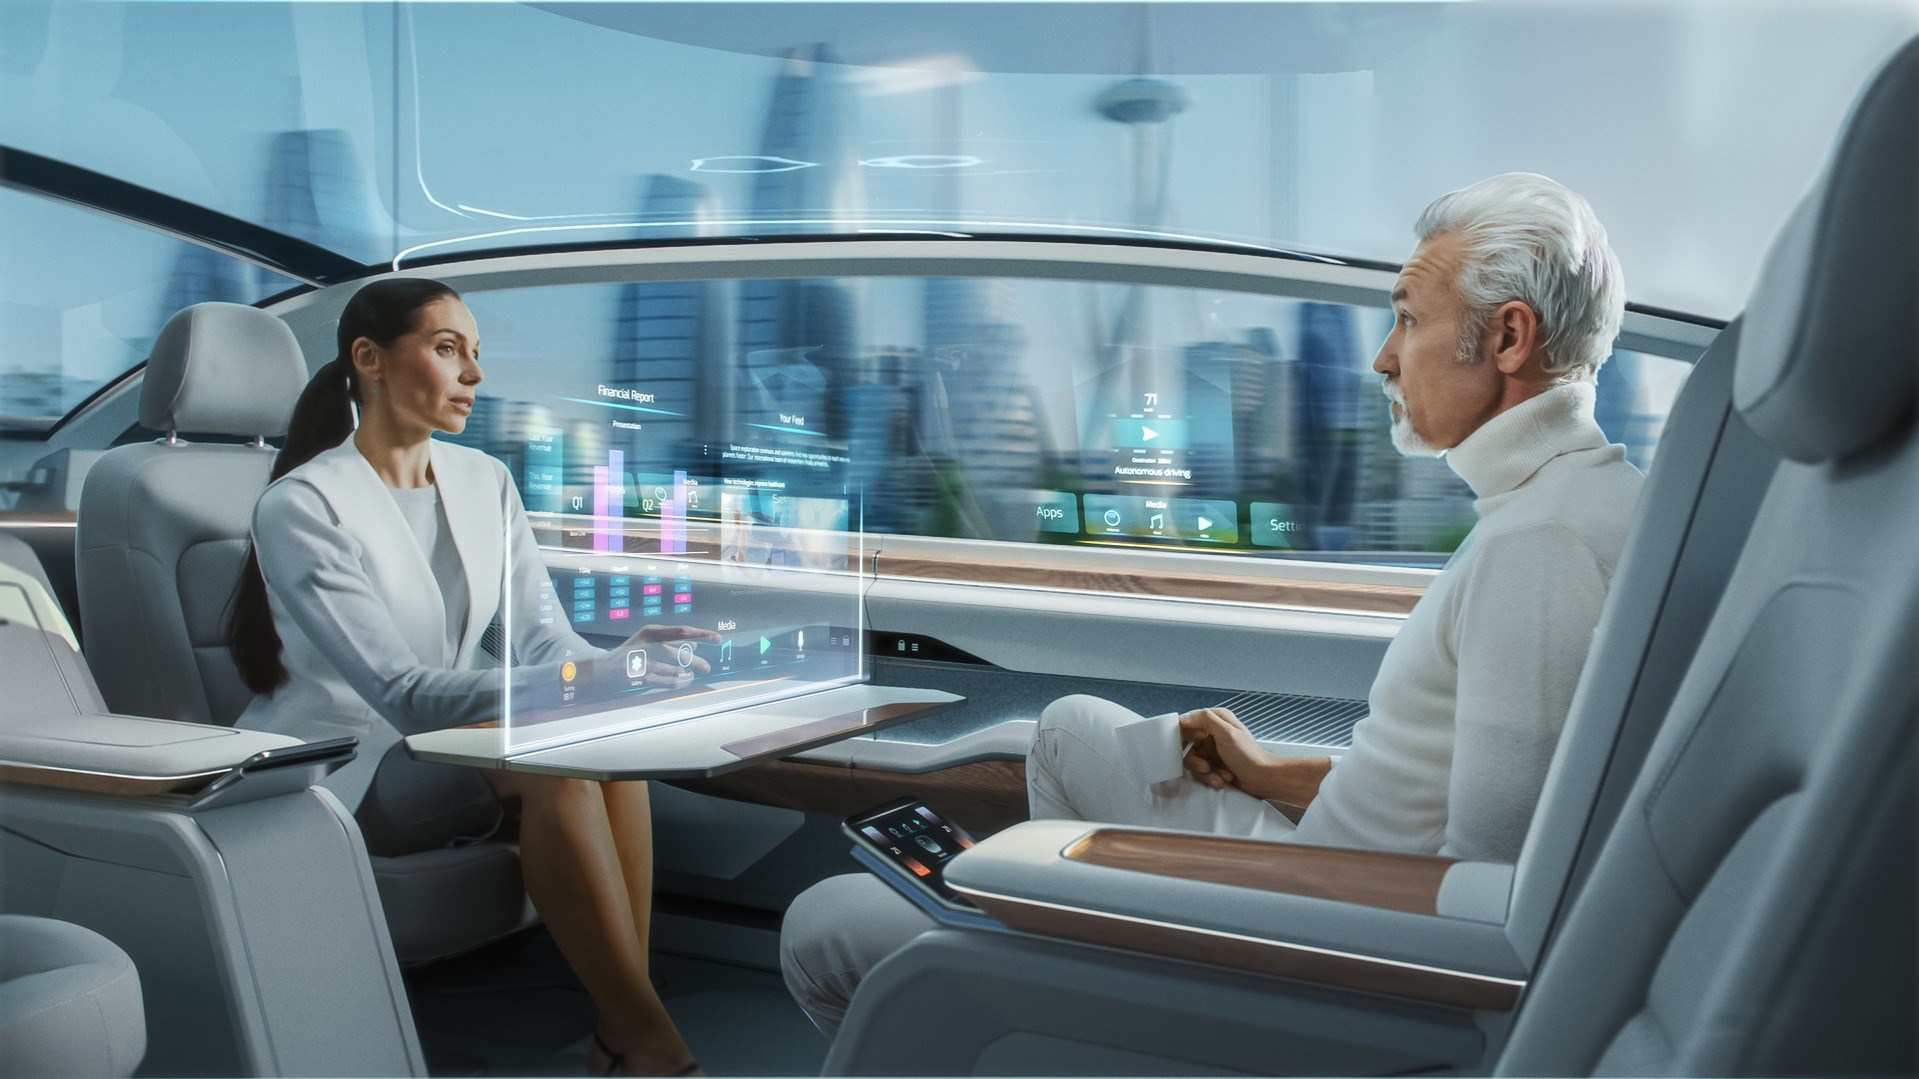 Casual Business Meeting Between Senior Male and Female inside a Futuristic Driverless Autonomous Car with Augmented Reality Presentation Interface. Self-Driving Van Driving on Downtown City Streets.